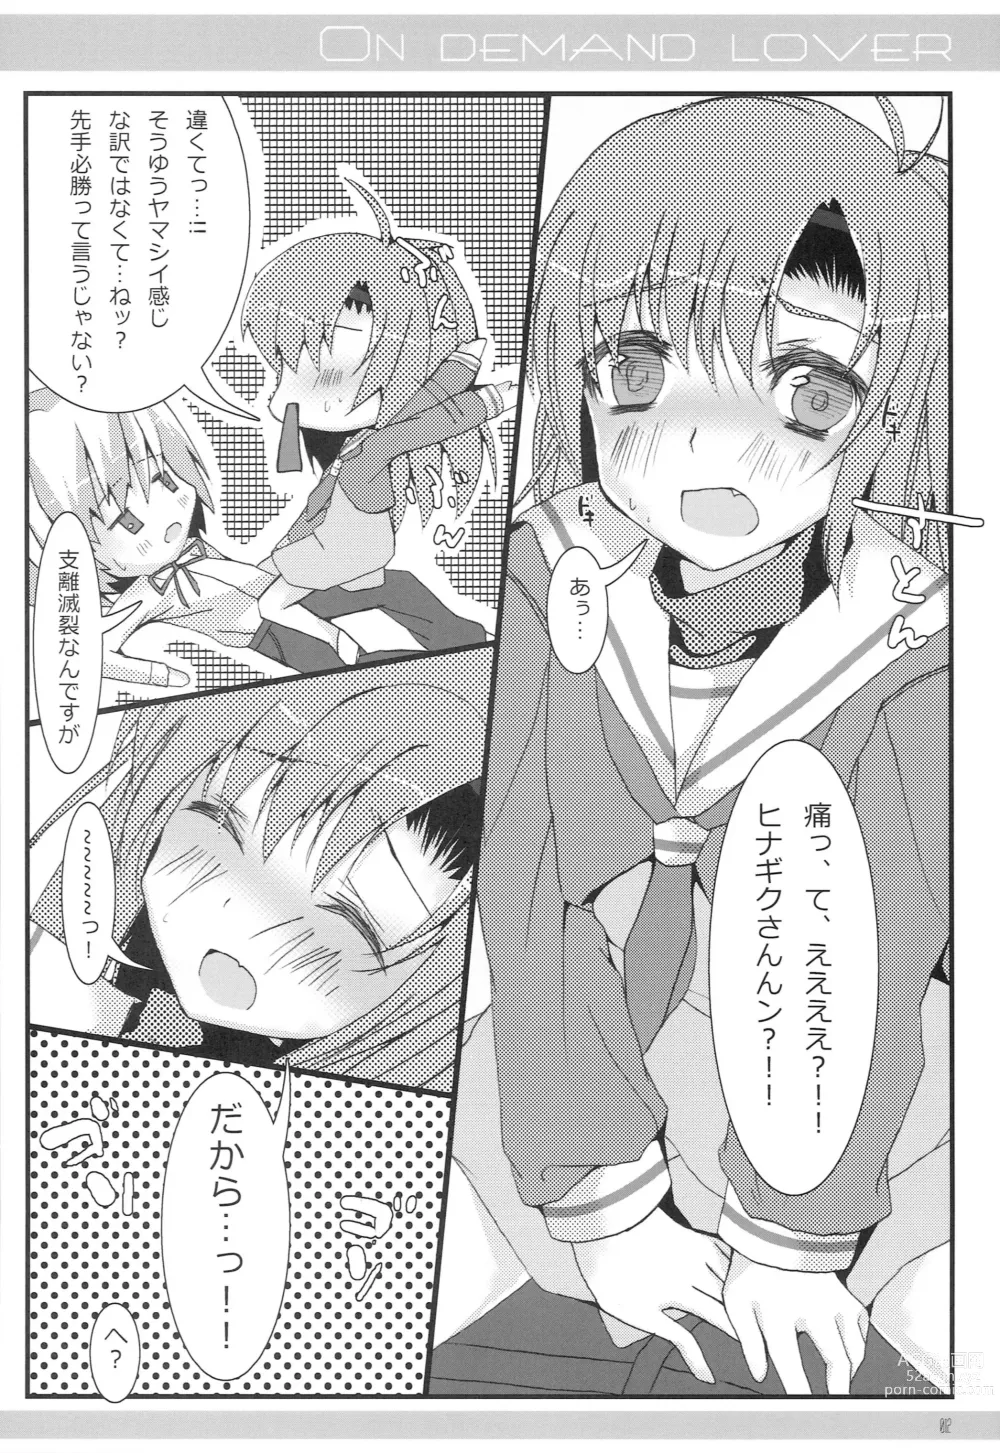 Page 10 of doujinshi ON DEMAND LOVER